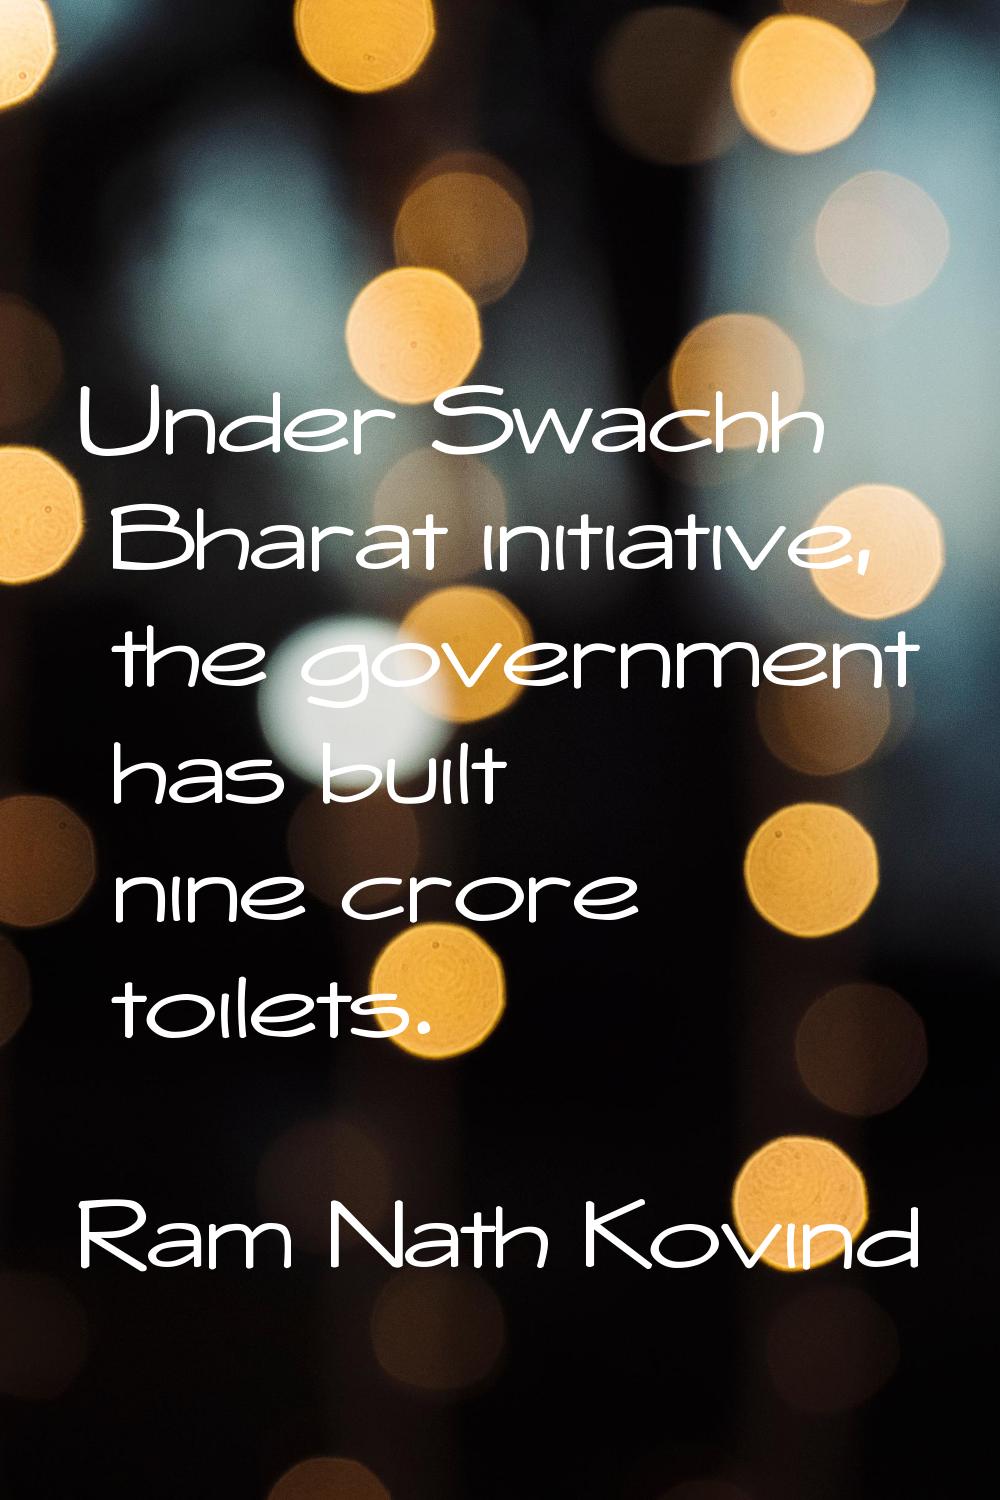 Under Swachh Bharat initiative, the government has built nine crore toilets.